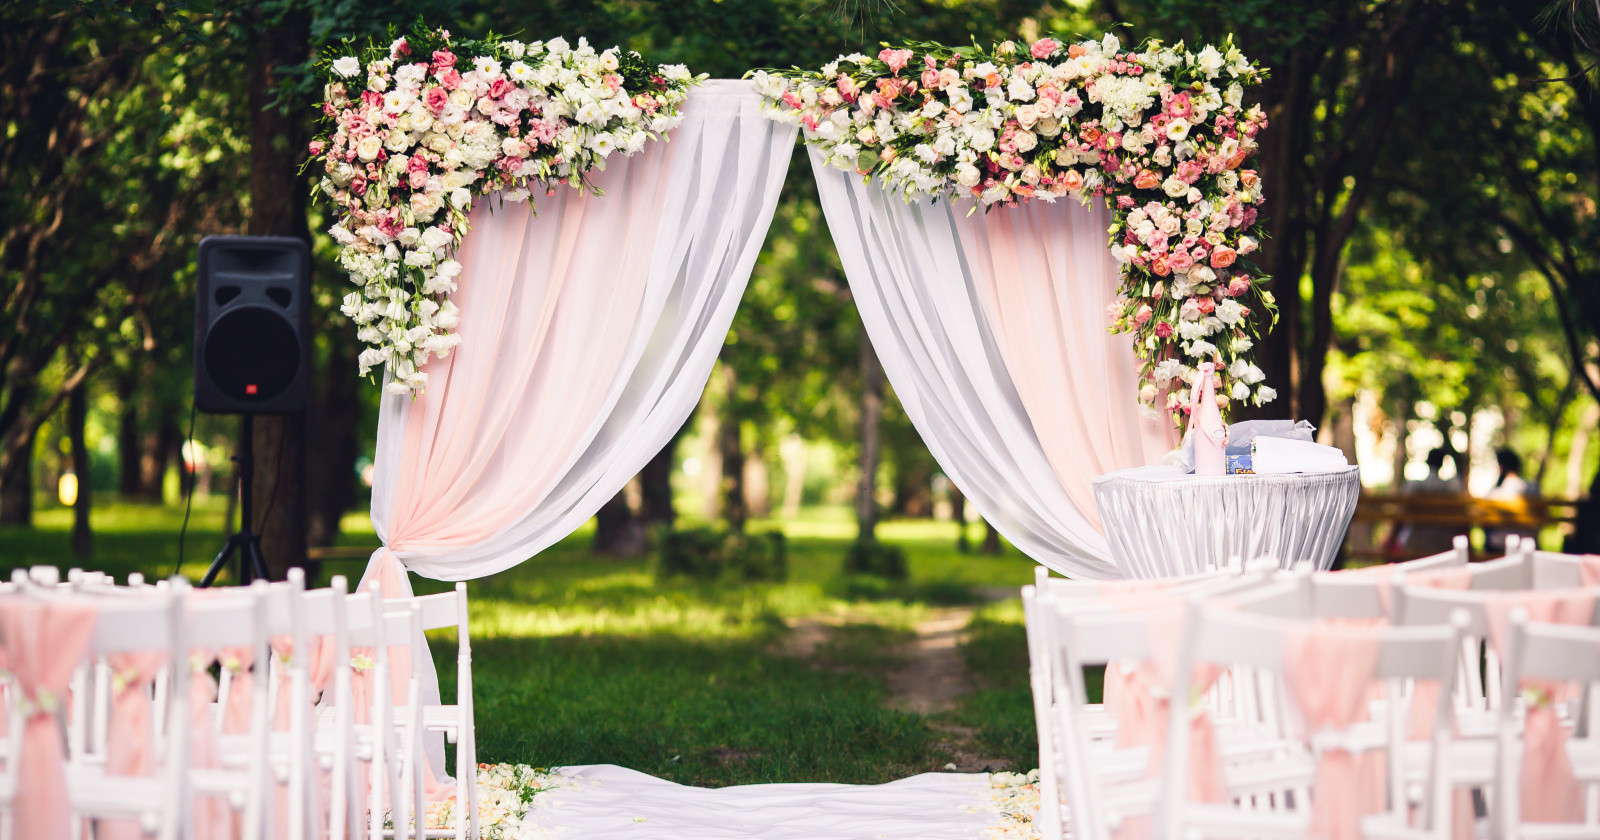 DIY Wedding Arch Kits
 7 Clever DIY Wedding Arch Kits Your Florist Wishes You